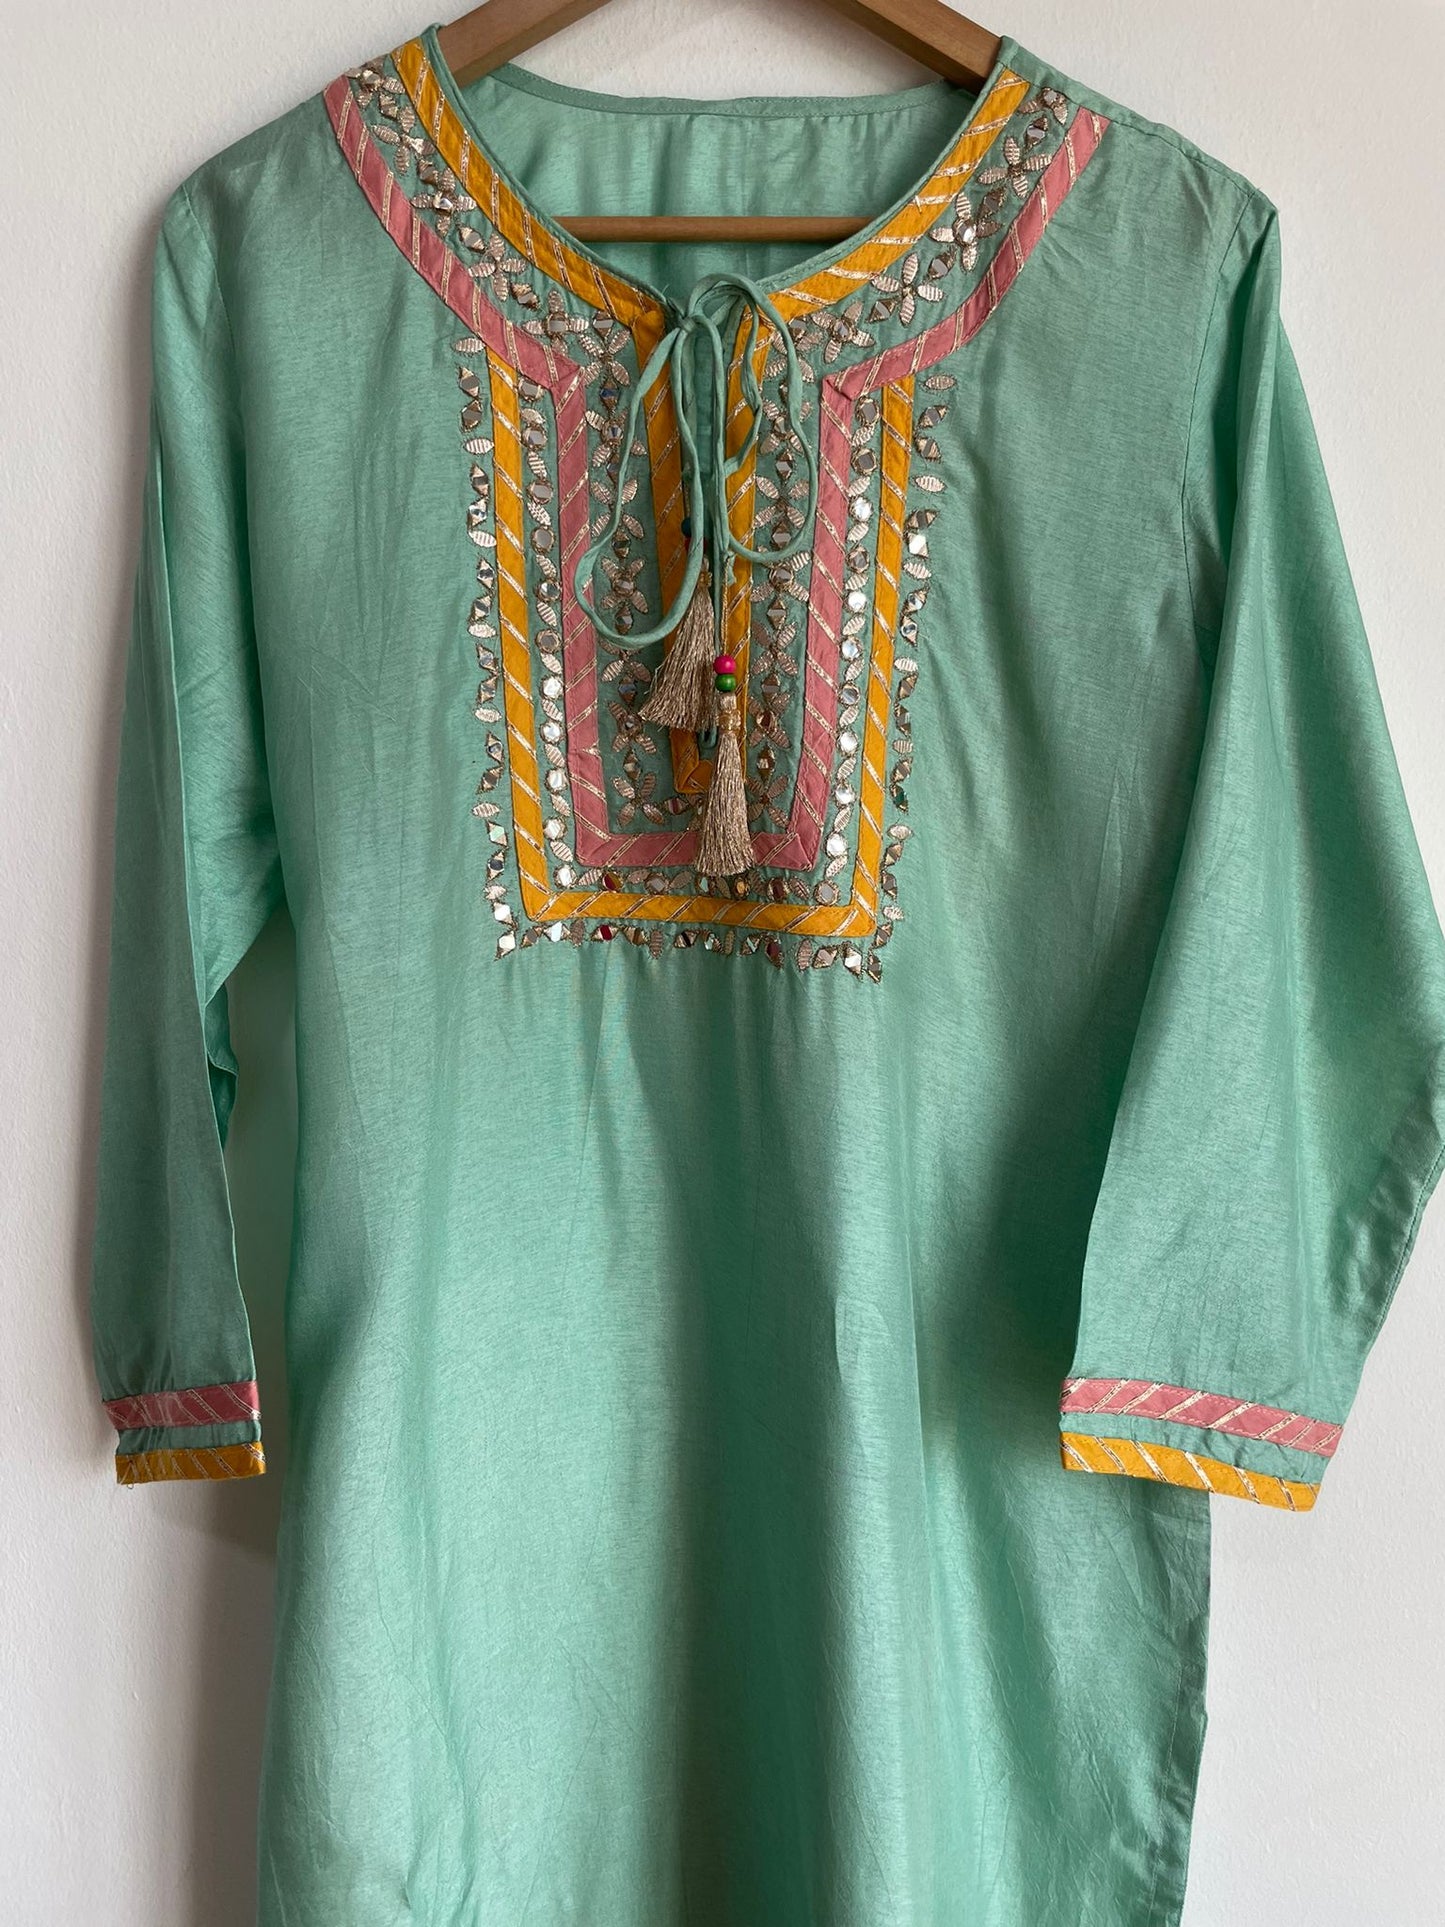 best quality and comfortable silk suit for women, buy now in singapore